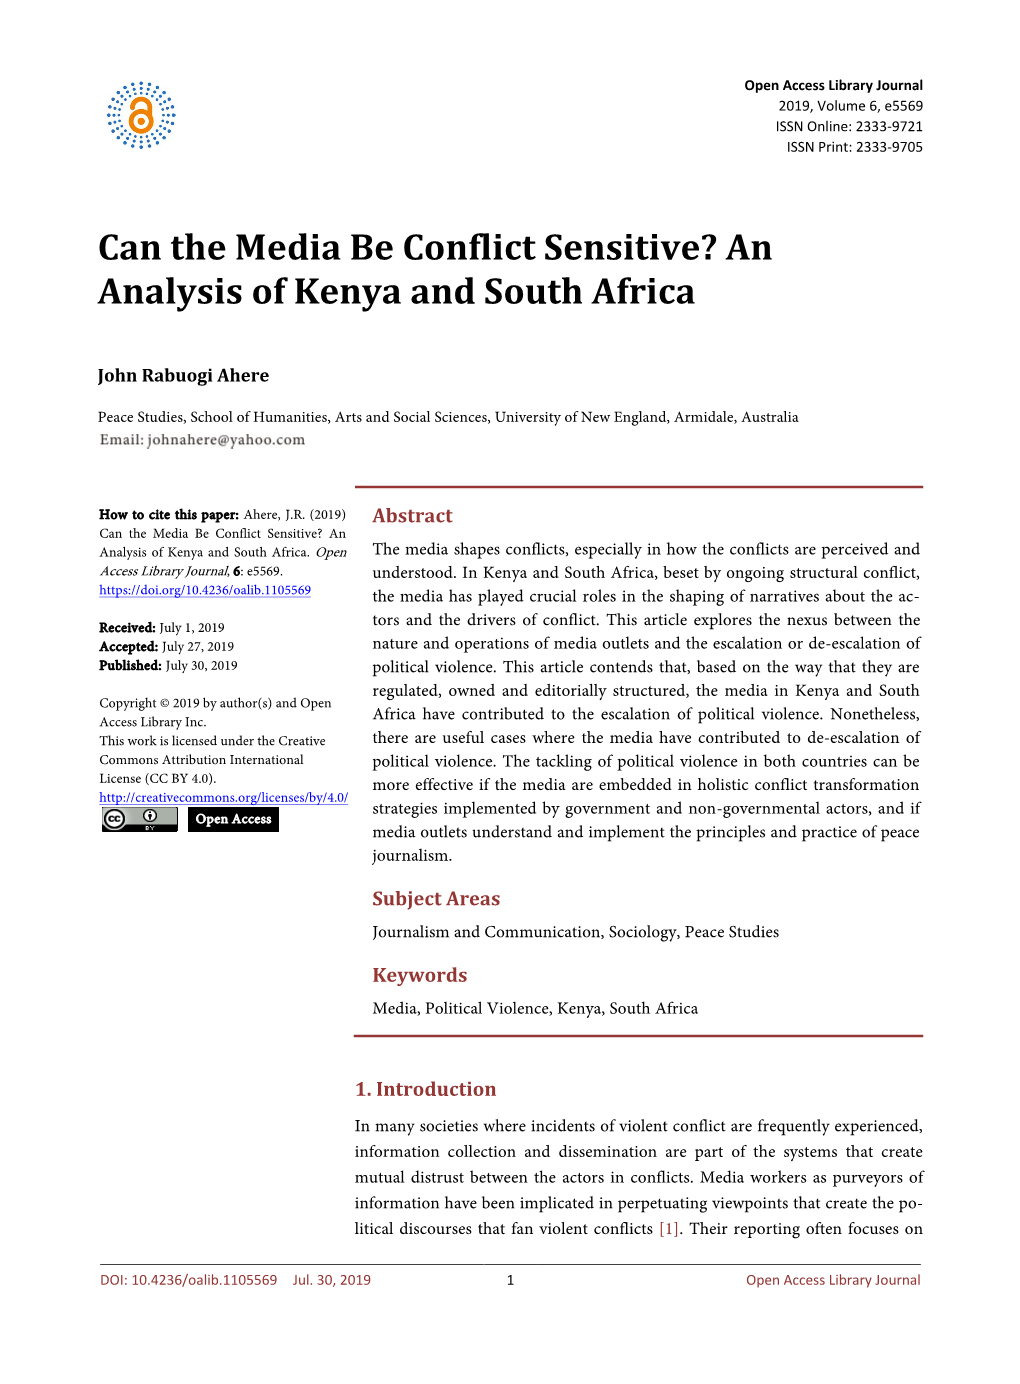 Can the Media Be Conflict Sensitive? an Analysis of Kenya and South Africa